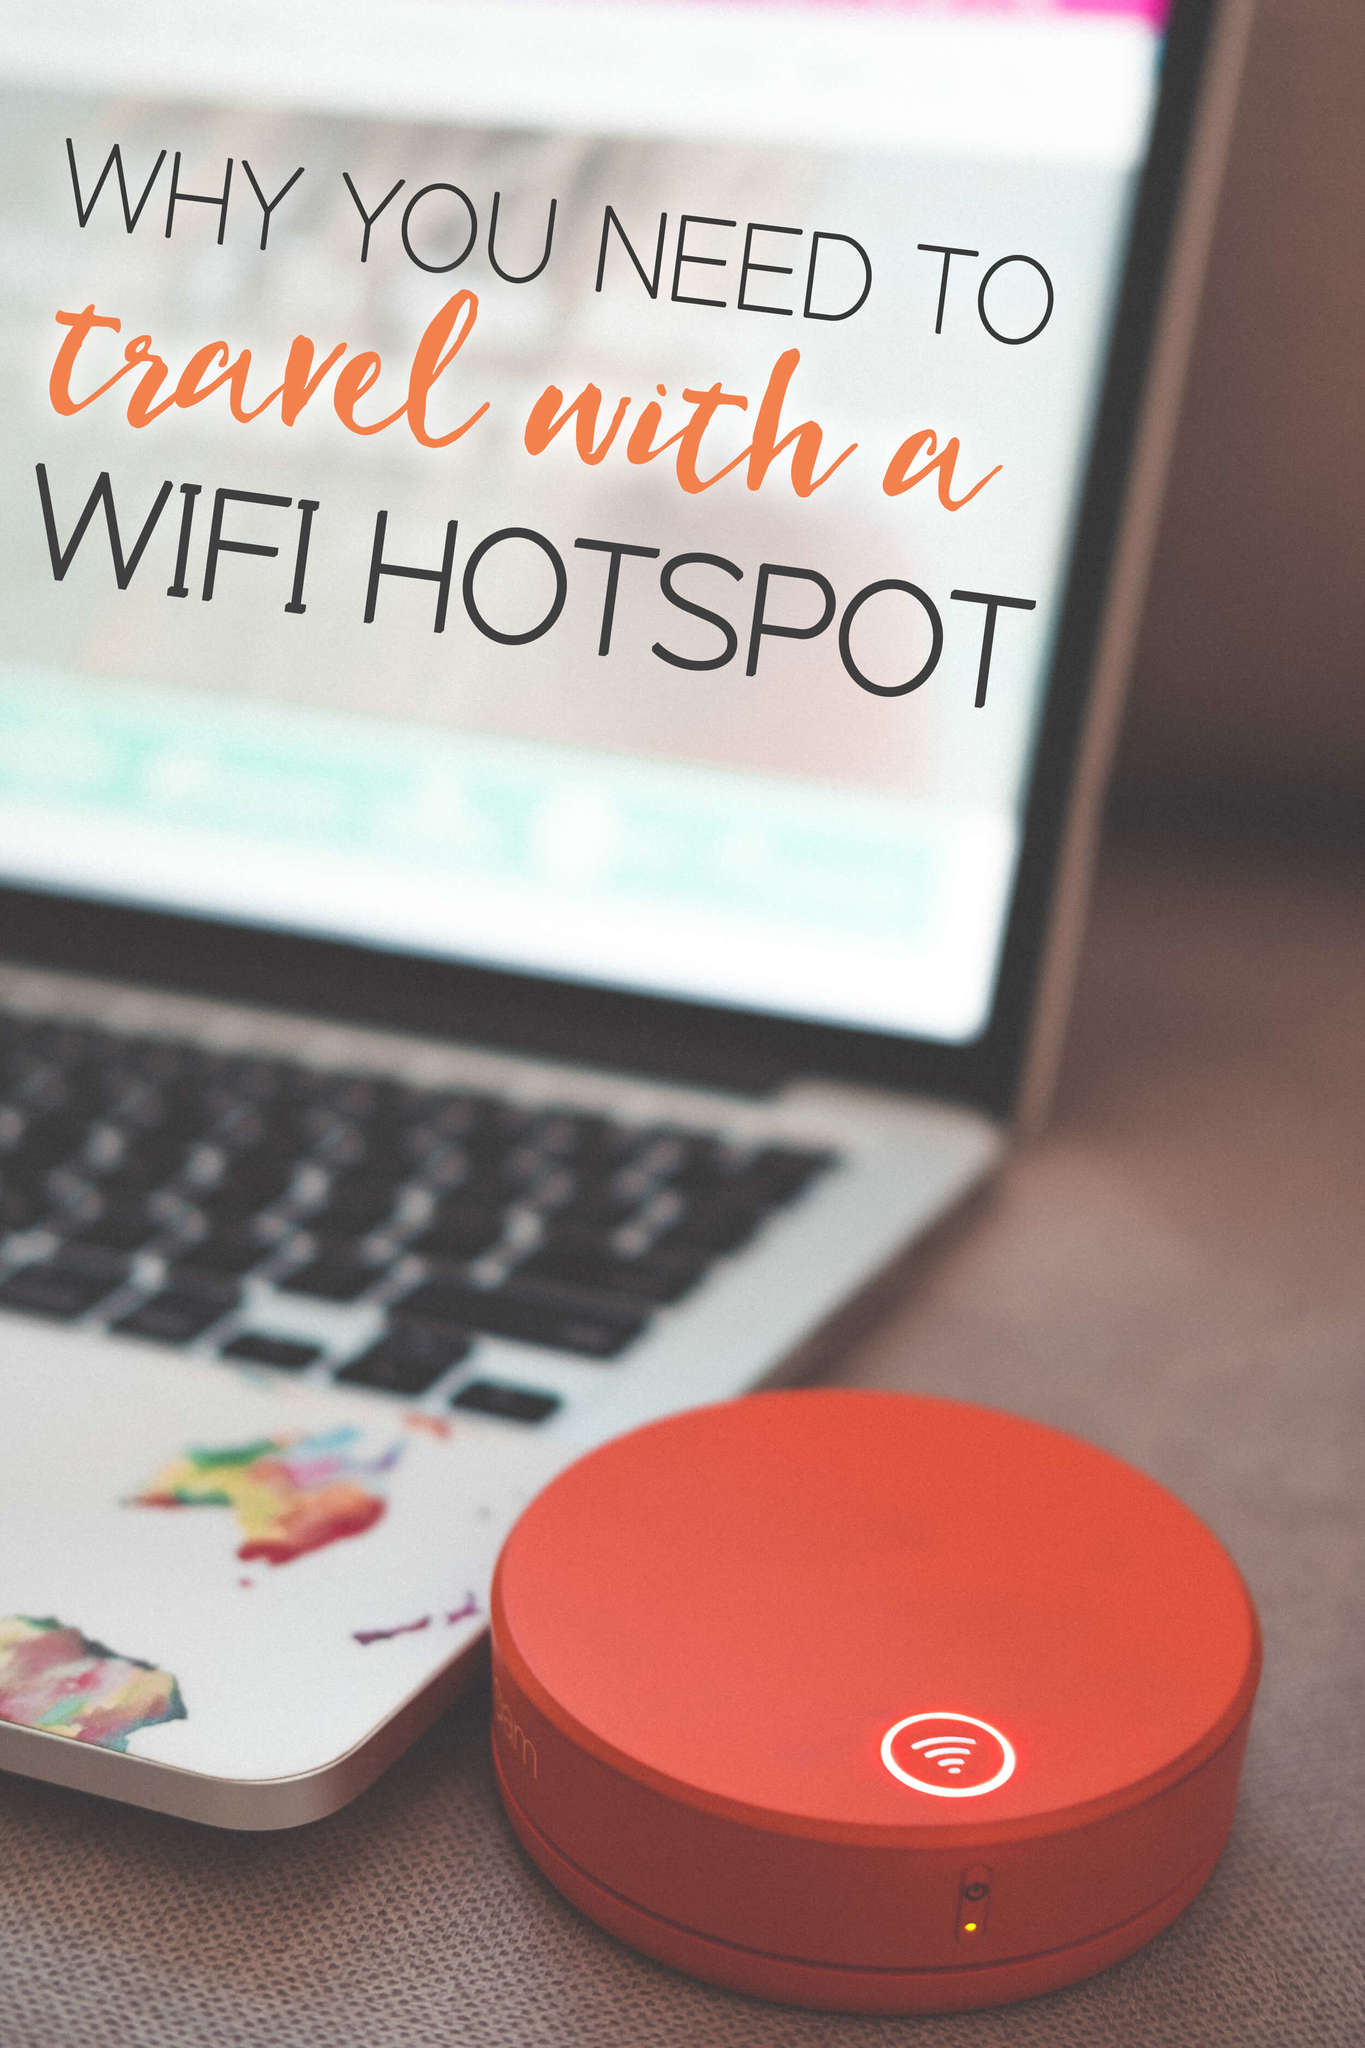 Why You Need to Travel with a Wi-Fi Hotspot